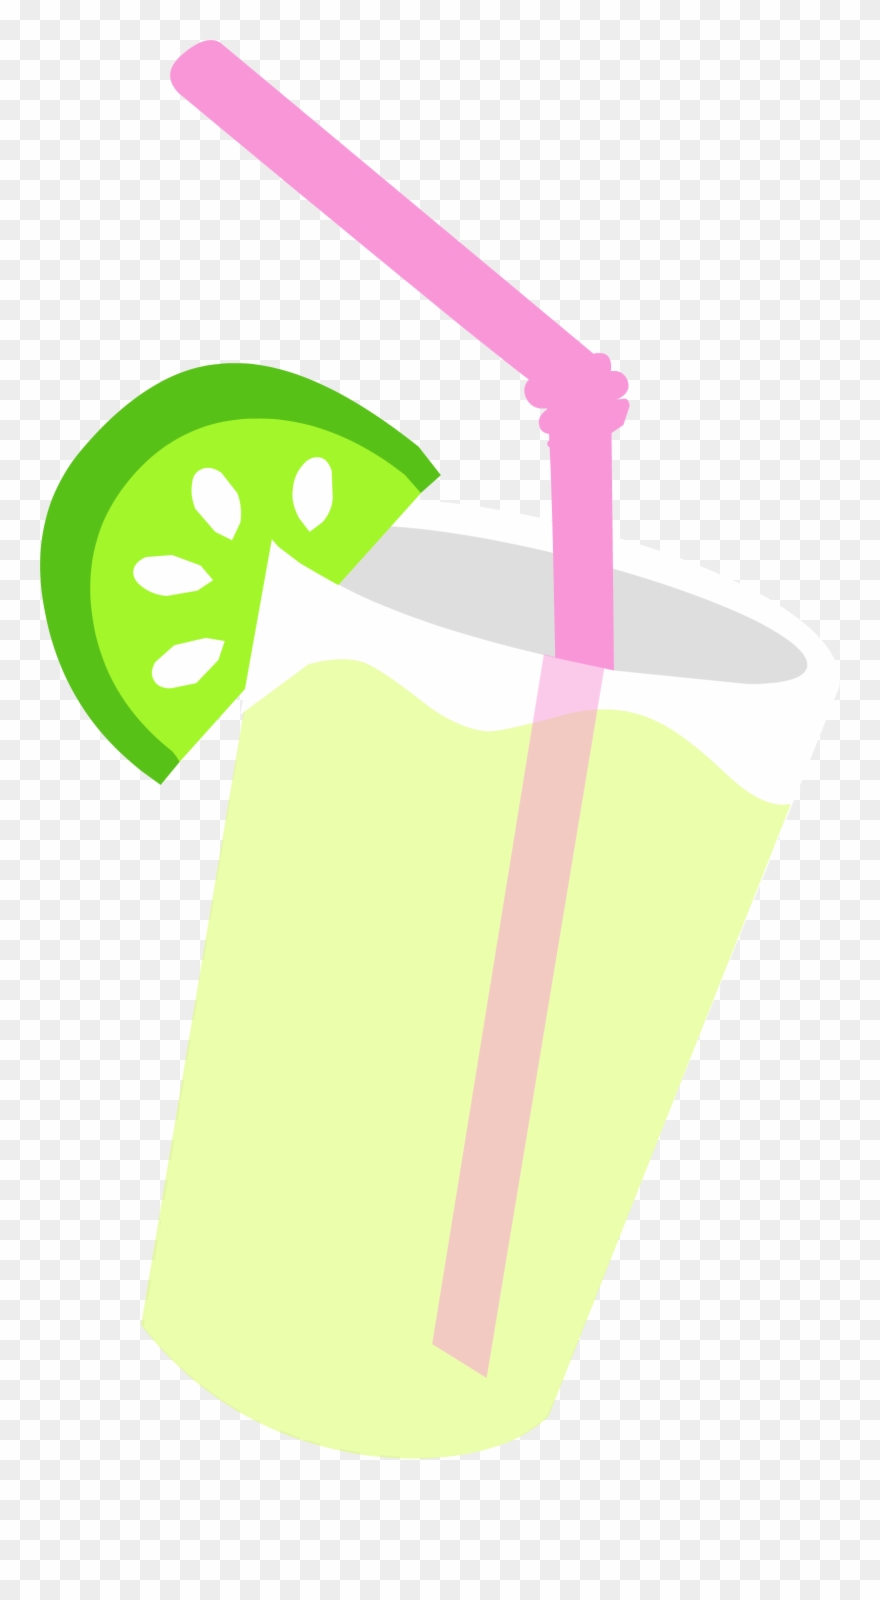 cocktail clipart shake drink